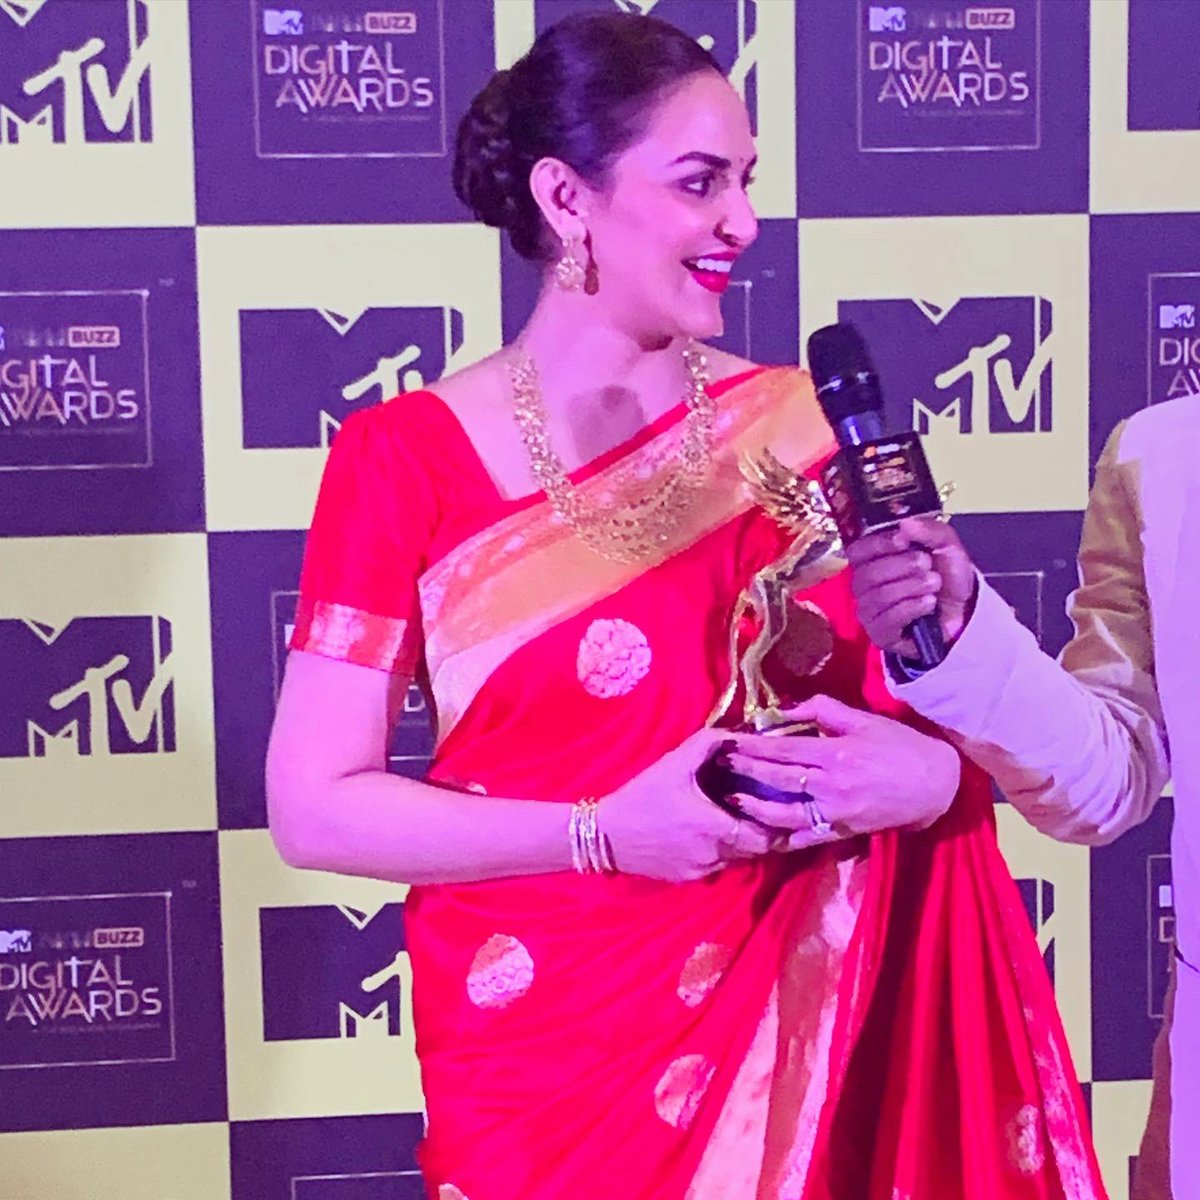 This one is for all my #fans out there who love me 🤗 #won the #bestactress #juryaward @iwmbuzzdigitalawards for my film #cakewalk thank u #mtviwmbuzzdigitalawards this feels awesome and a big shout out to everyone from the team of our film @Ramkamal @imaritrads @sarbanitweets